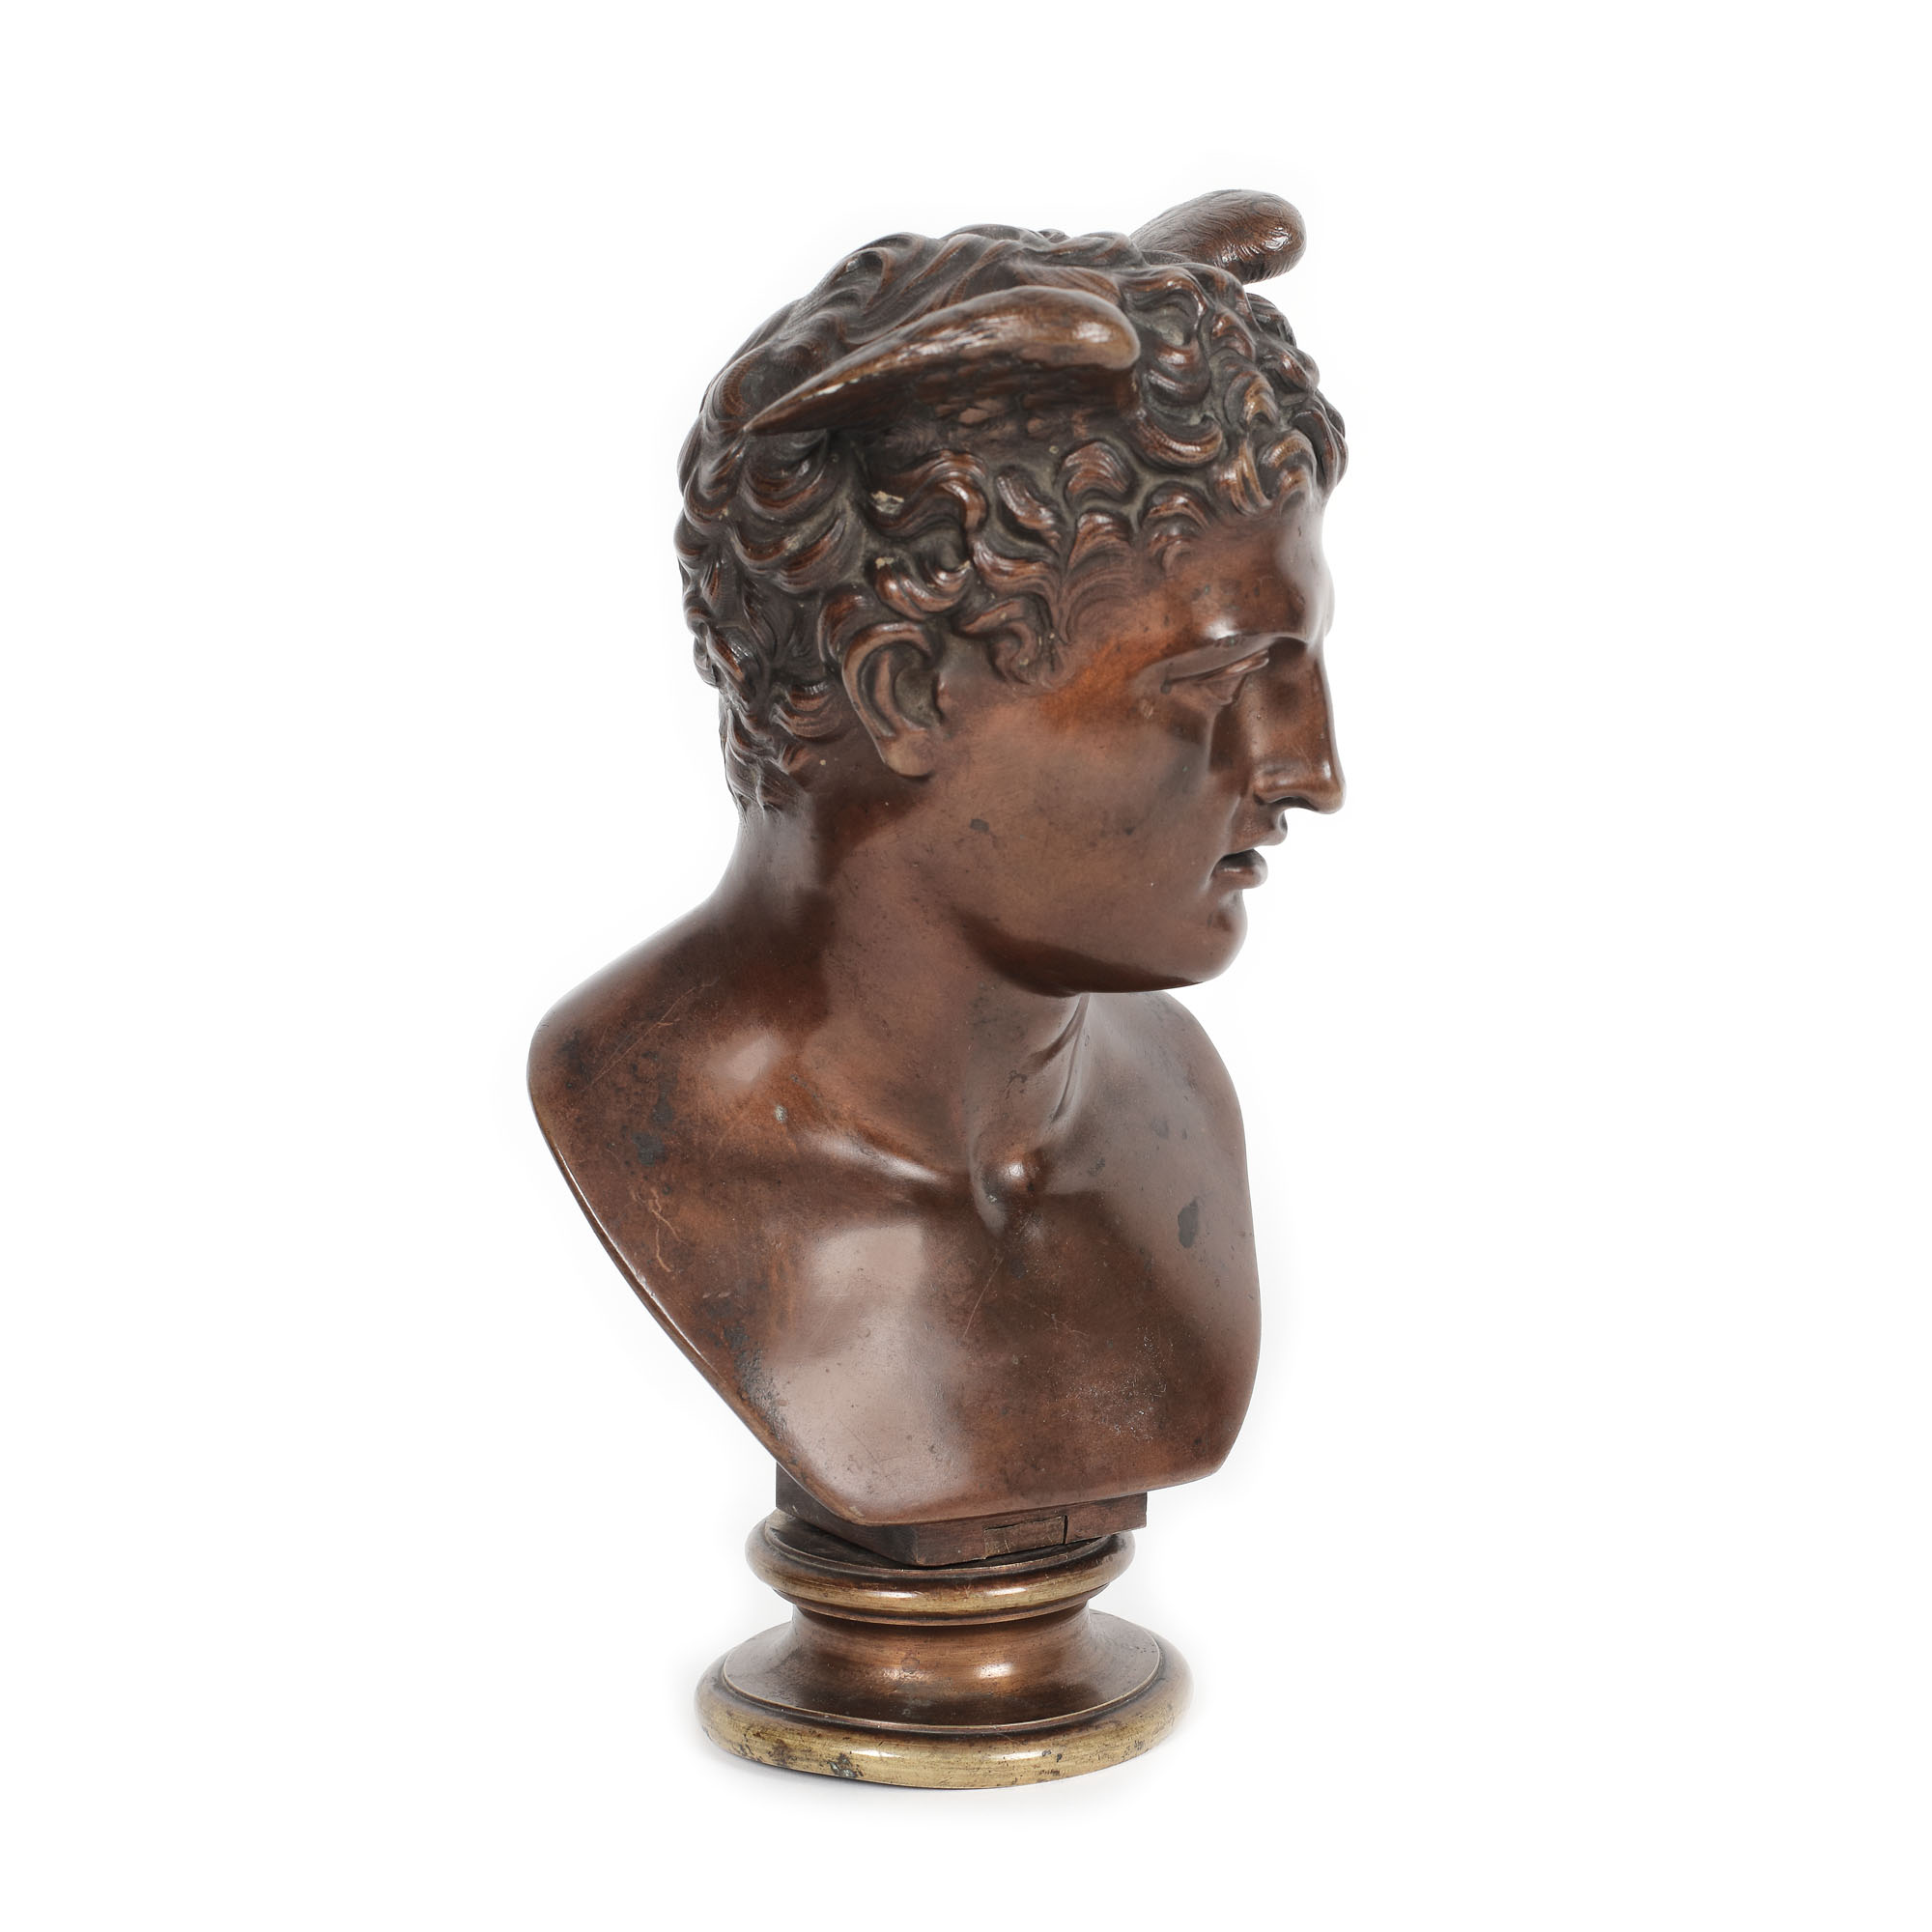 French workshop, Hermes - decorative bronze sculpture E. Jullien, second half of the 19th century - Image 3 of 4